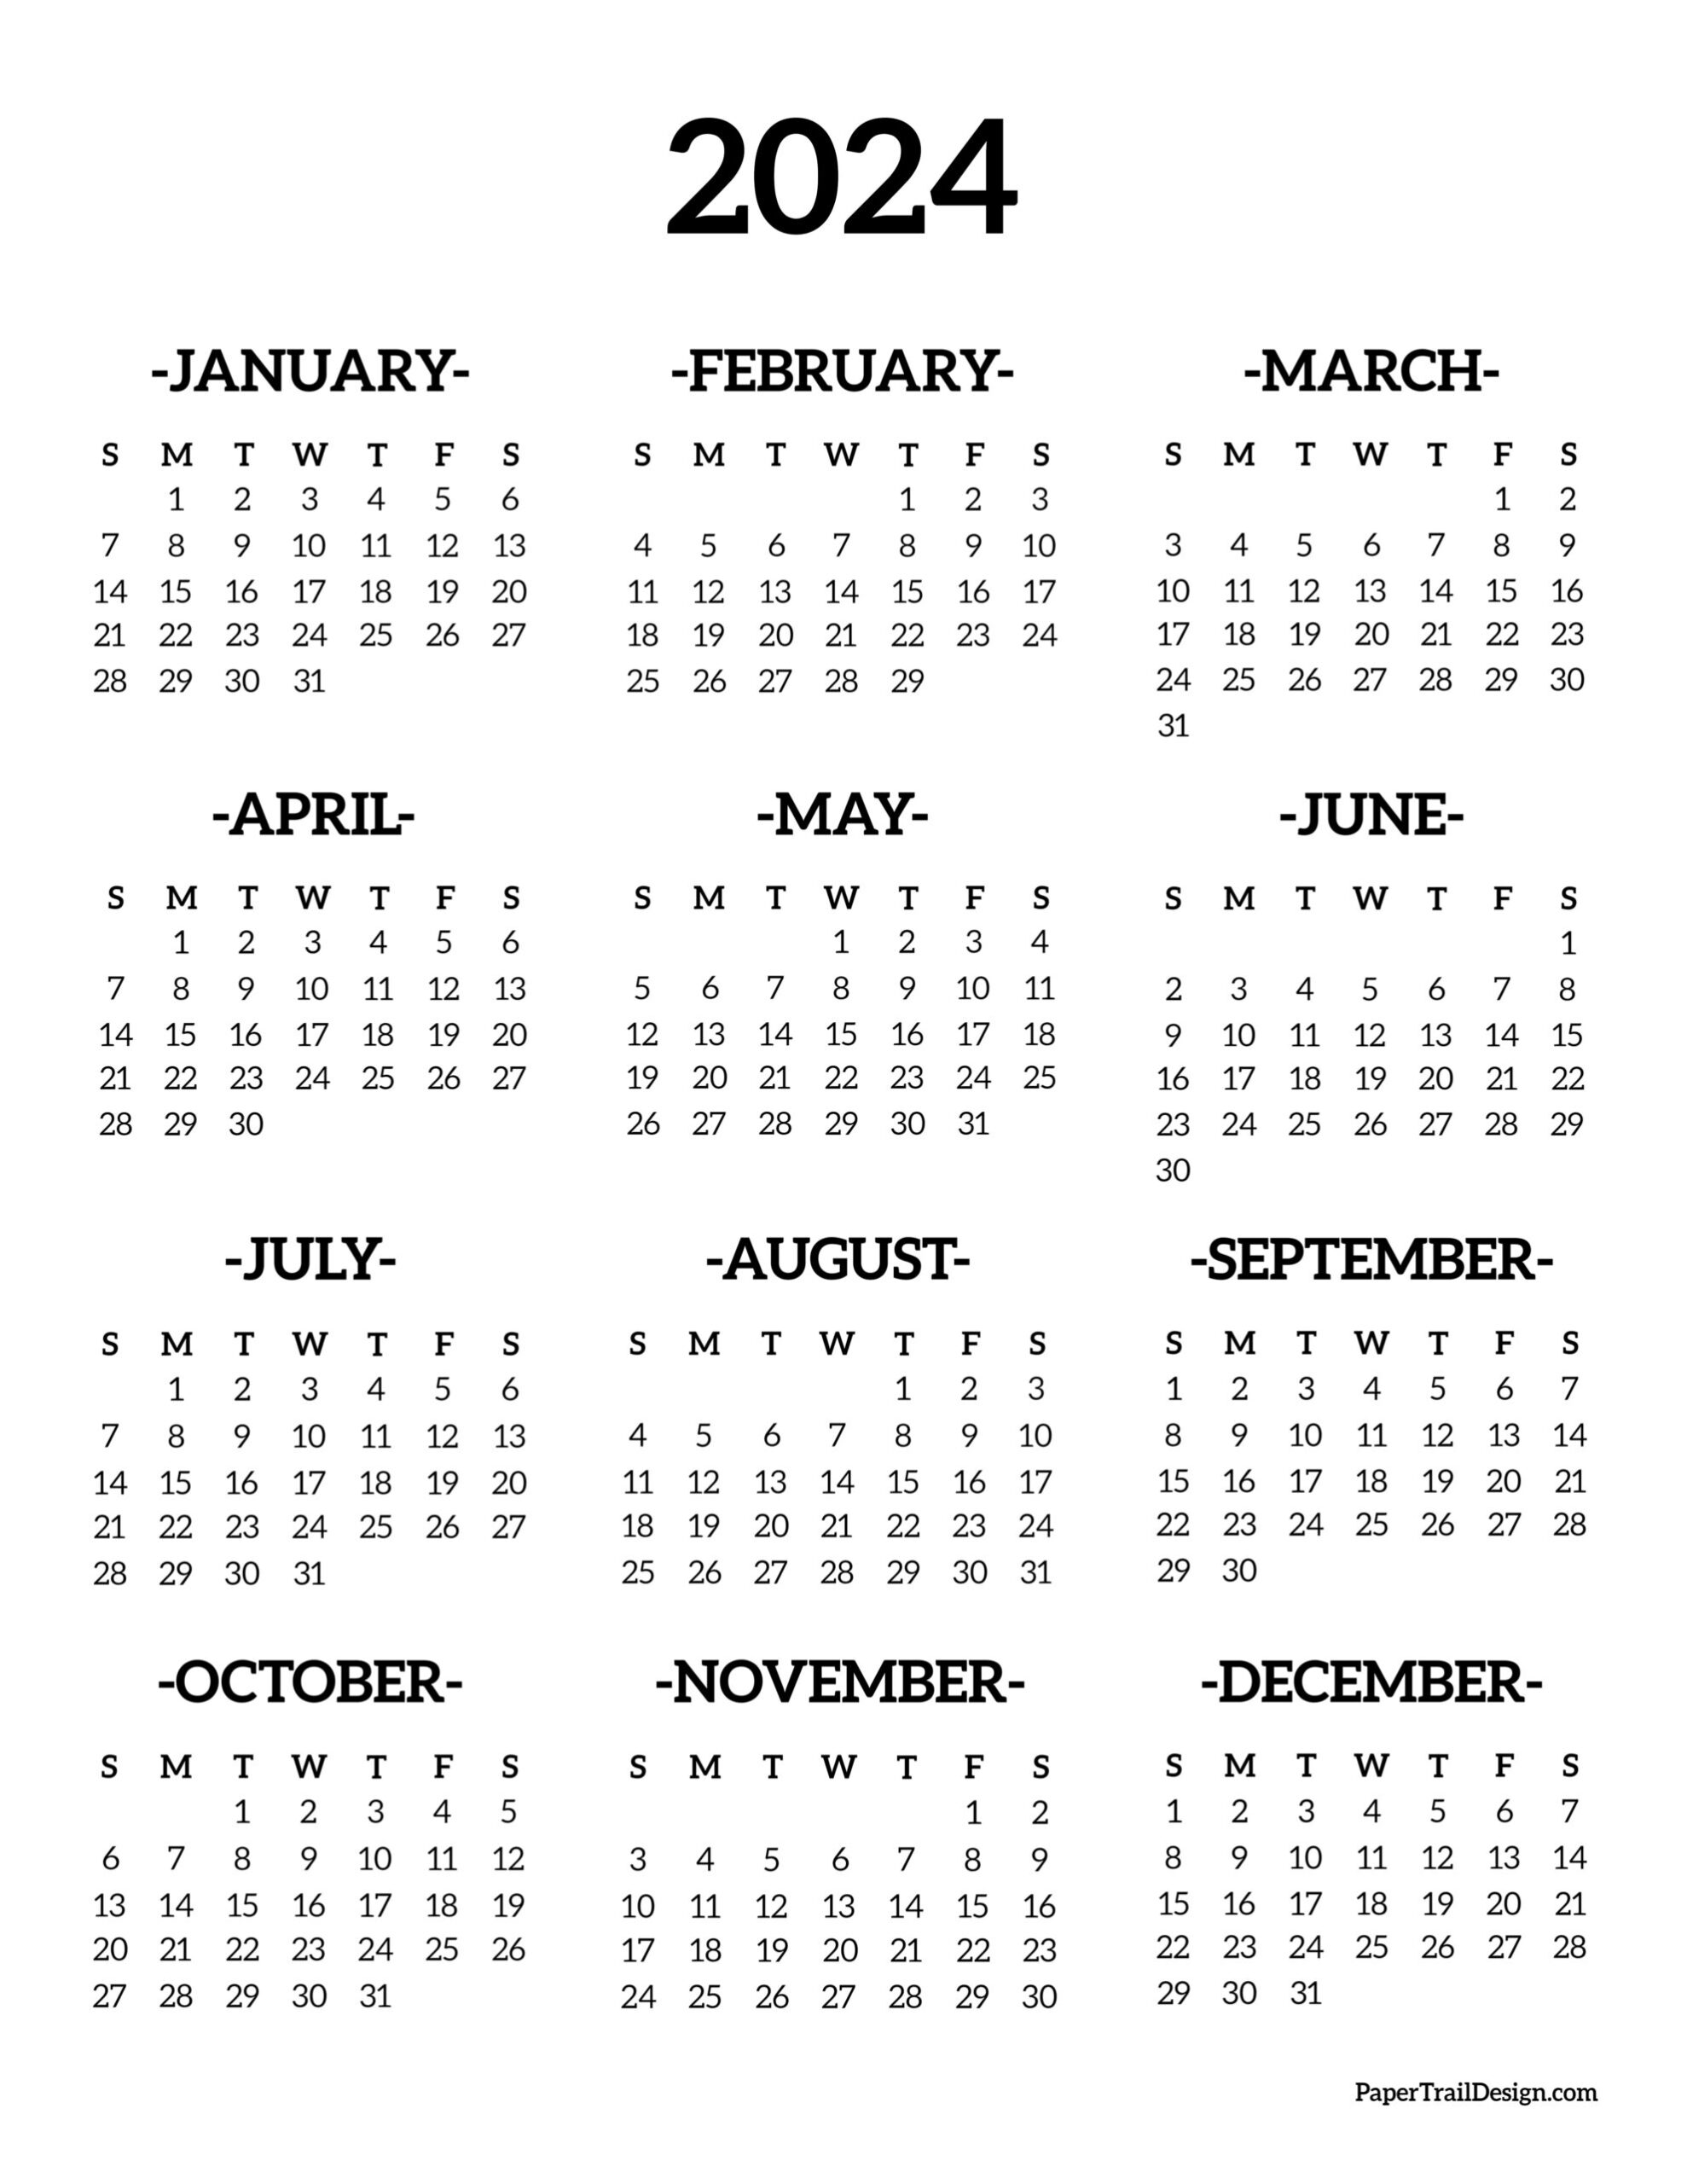 Calendar 2024 Printable One Page - Paper Trail Design for Free 2024 Printable Calendar One Page